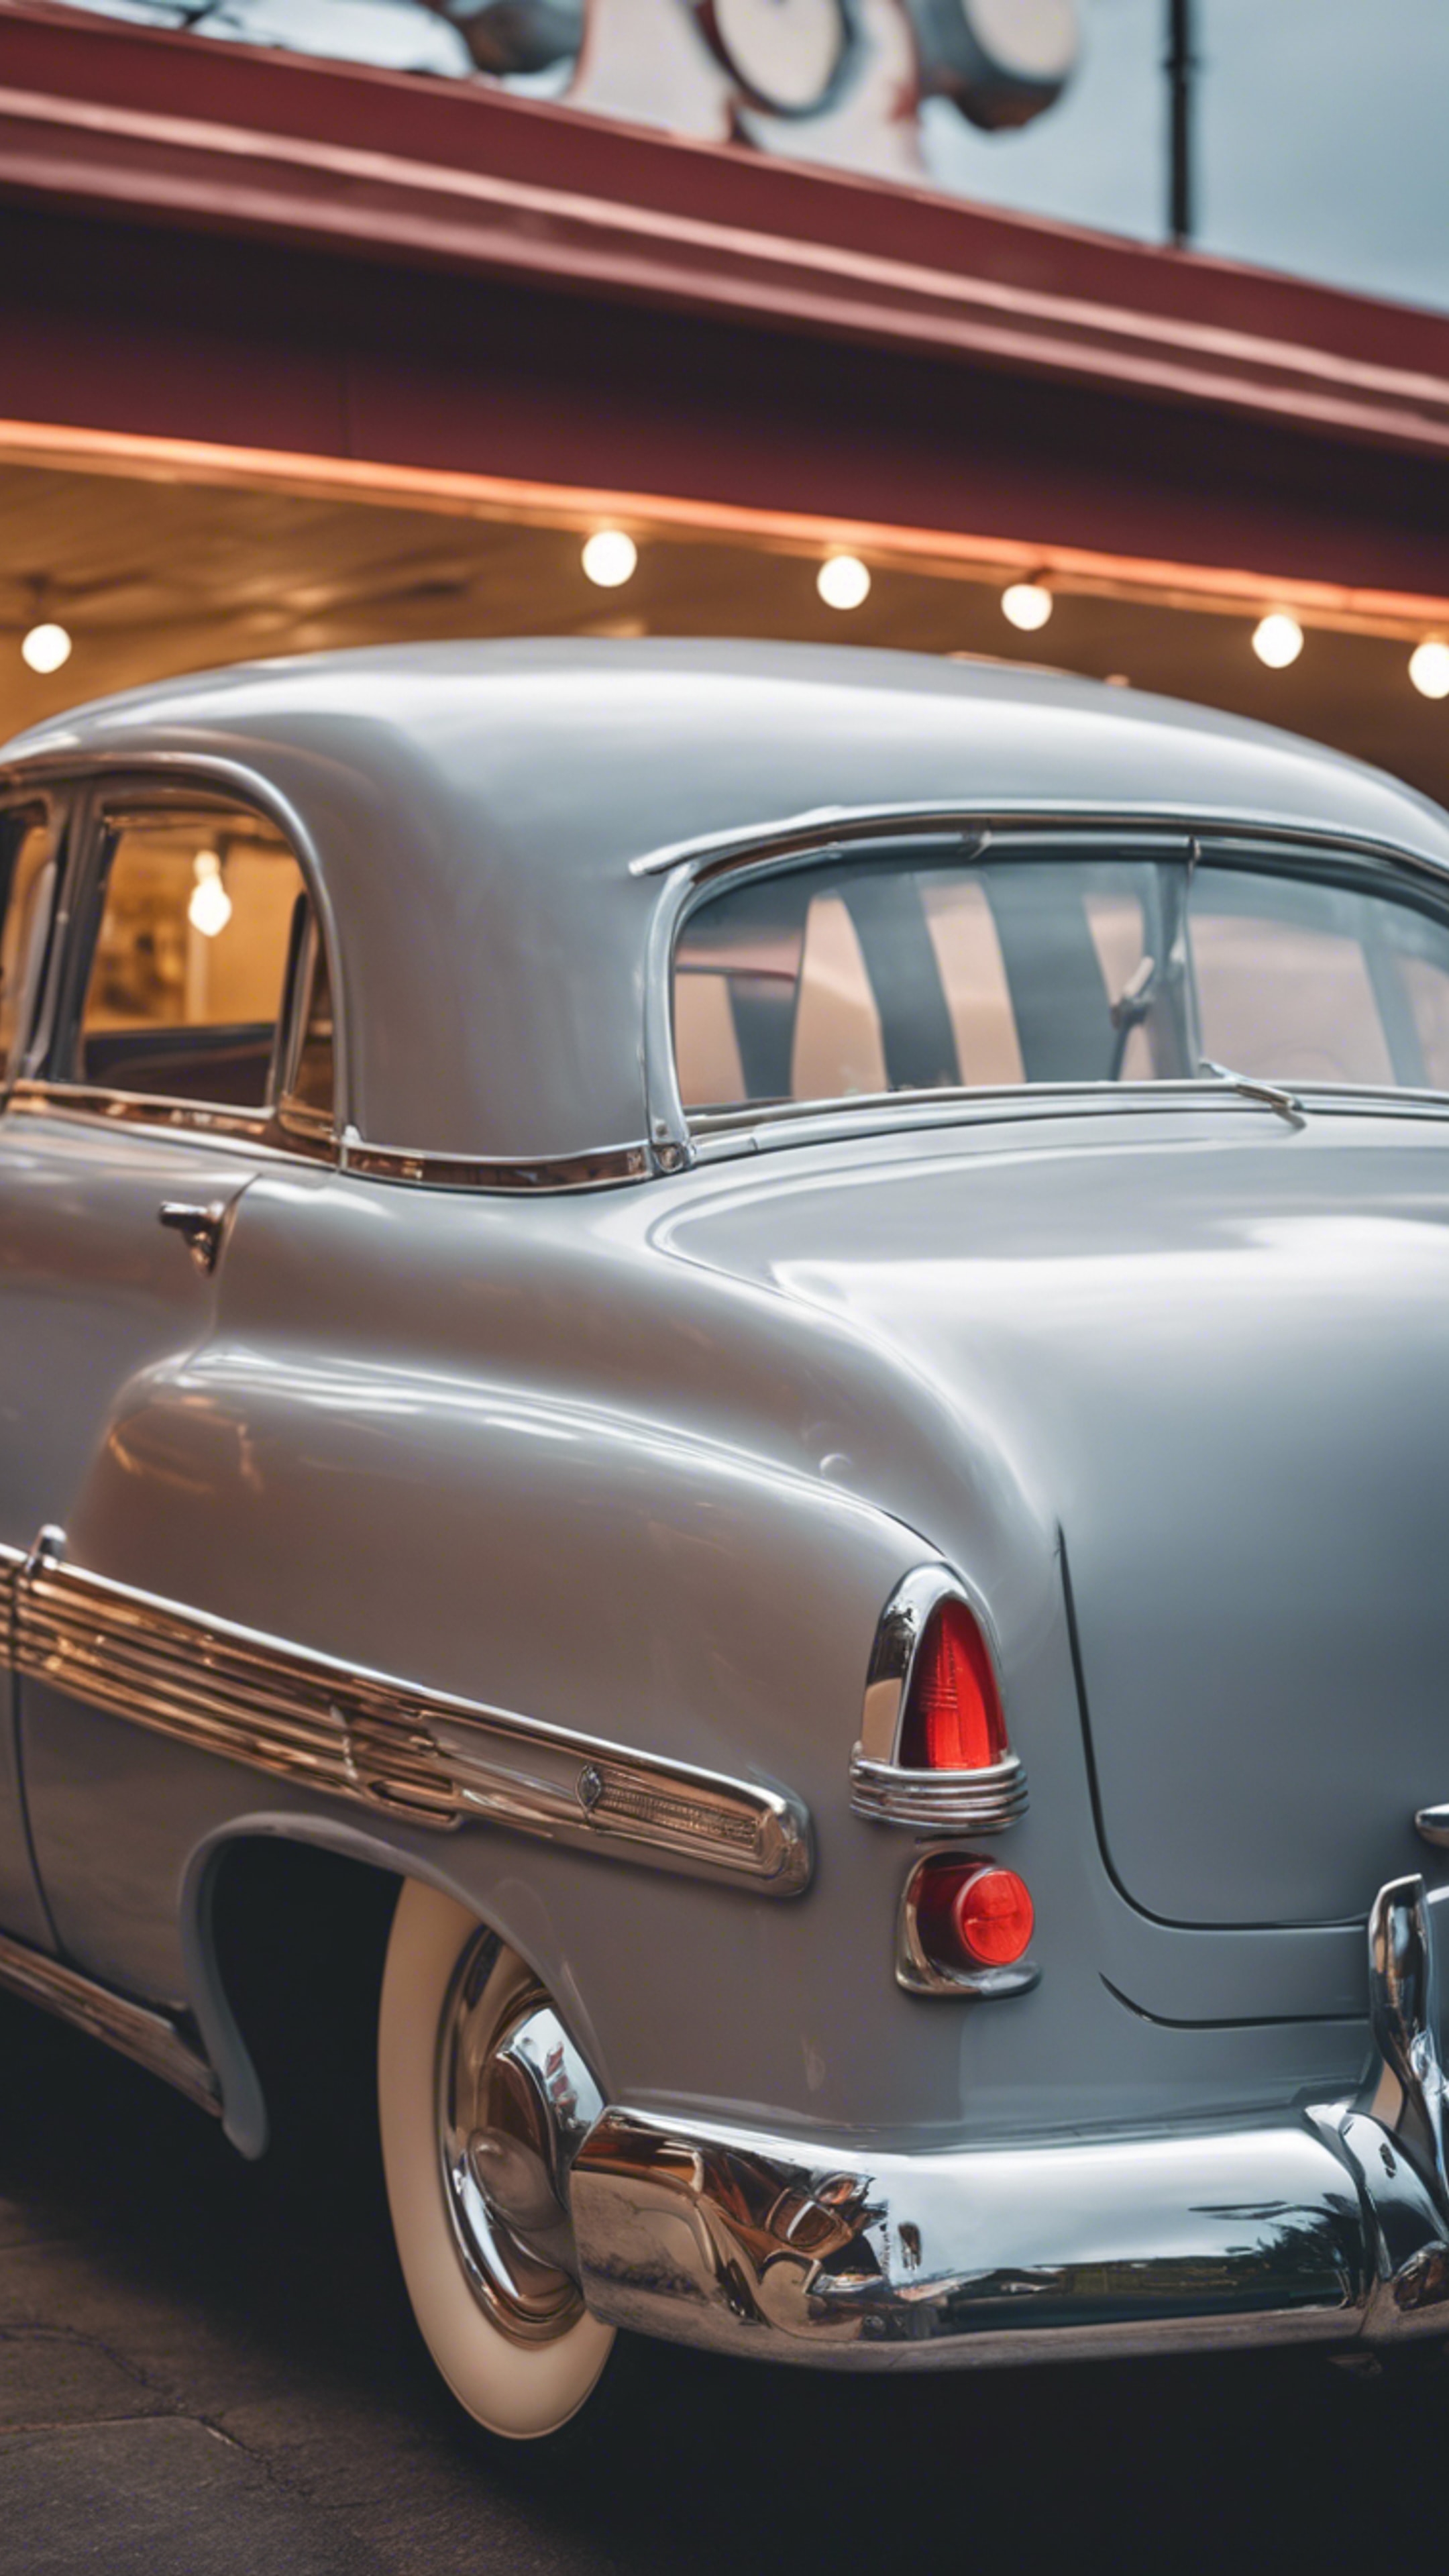 A vintage 1950s car, painted in light gray, parked outside a quirky roadside diner. Tapet[6f1ad1f93eb7446a85d1]